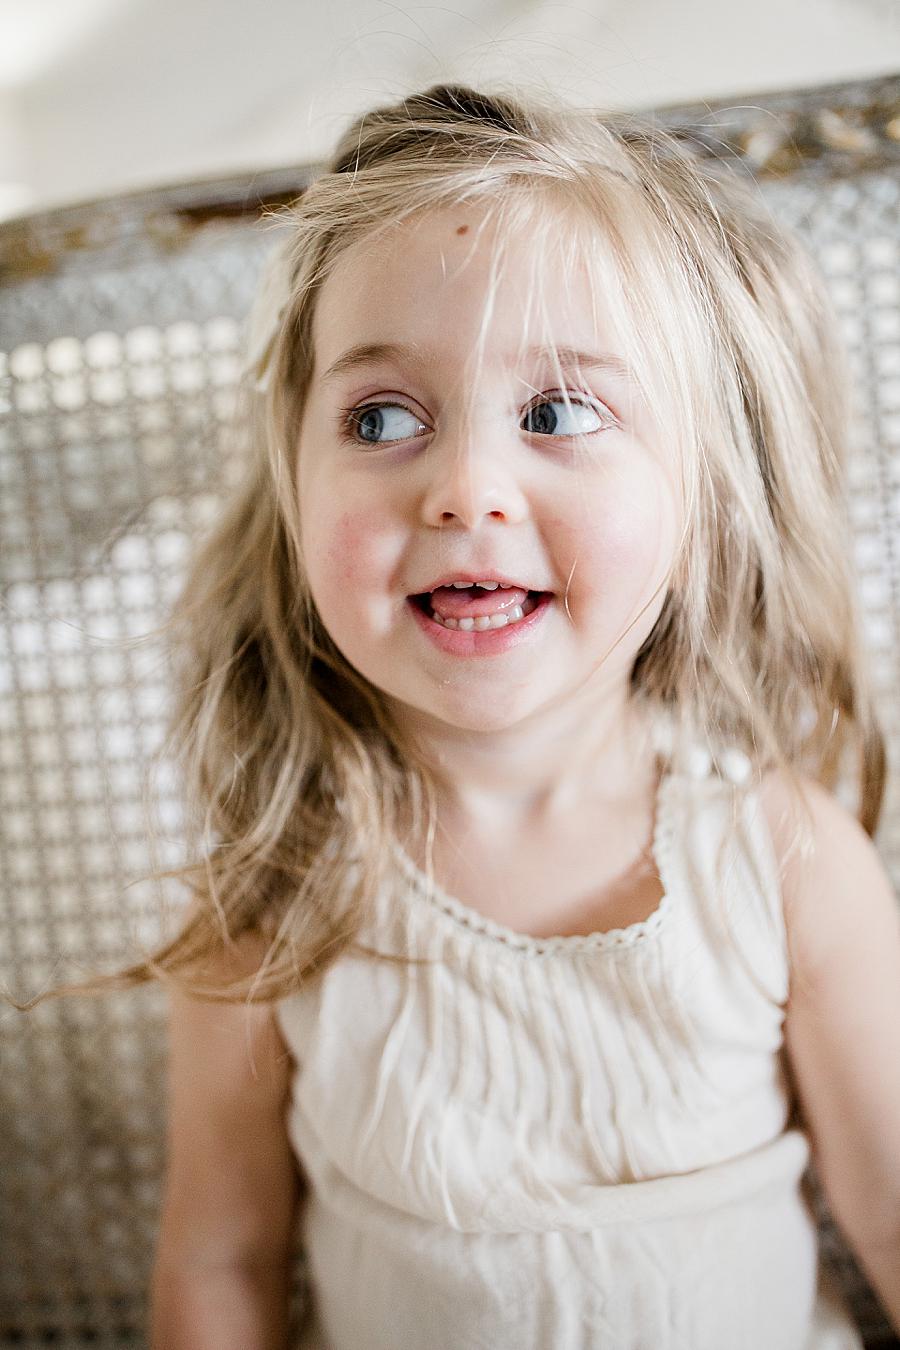 Middle child at this Knoxville Lifestyle by Knoxville Wedding Photographer, Amanda May Photos.